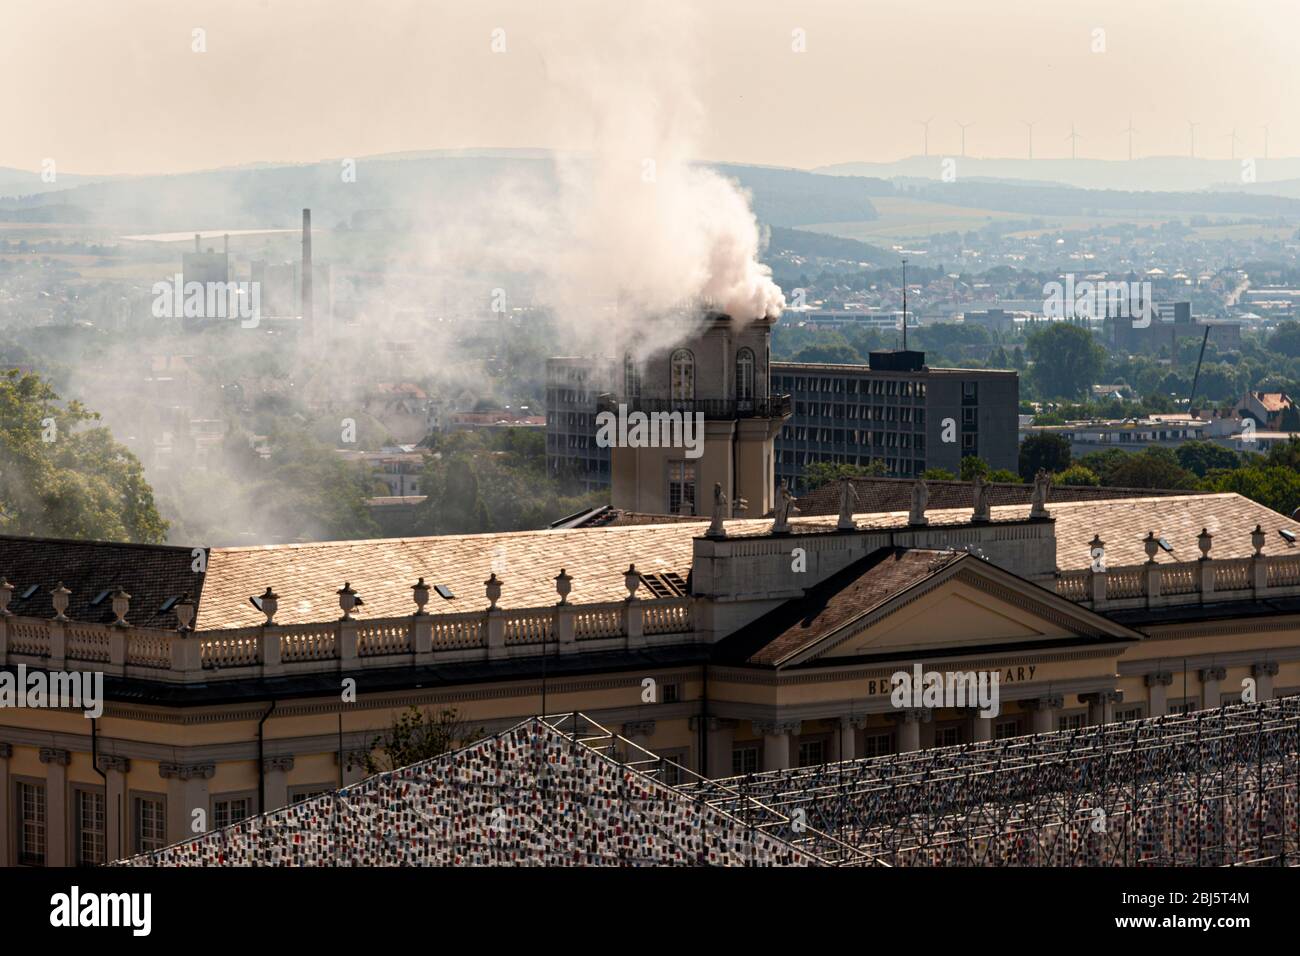 Parthenon of Books and Expiration Movement, Documenta 14 Installation in Zwehrenturm , Kassel, Germany. Kassel sends smoke signals from the Documenta from Zwehrenturm. Artist Daniel Knorr wants to use this smoke to send "warm signals" to Athens. Stock Photo